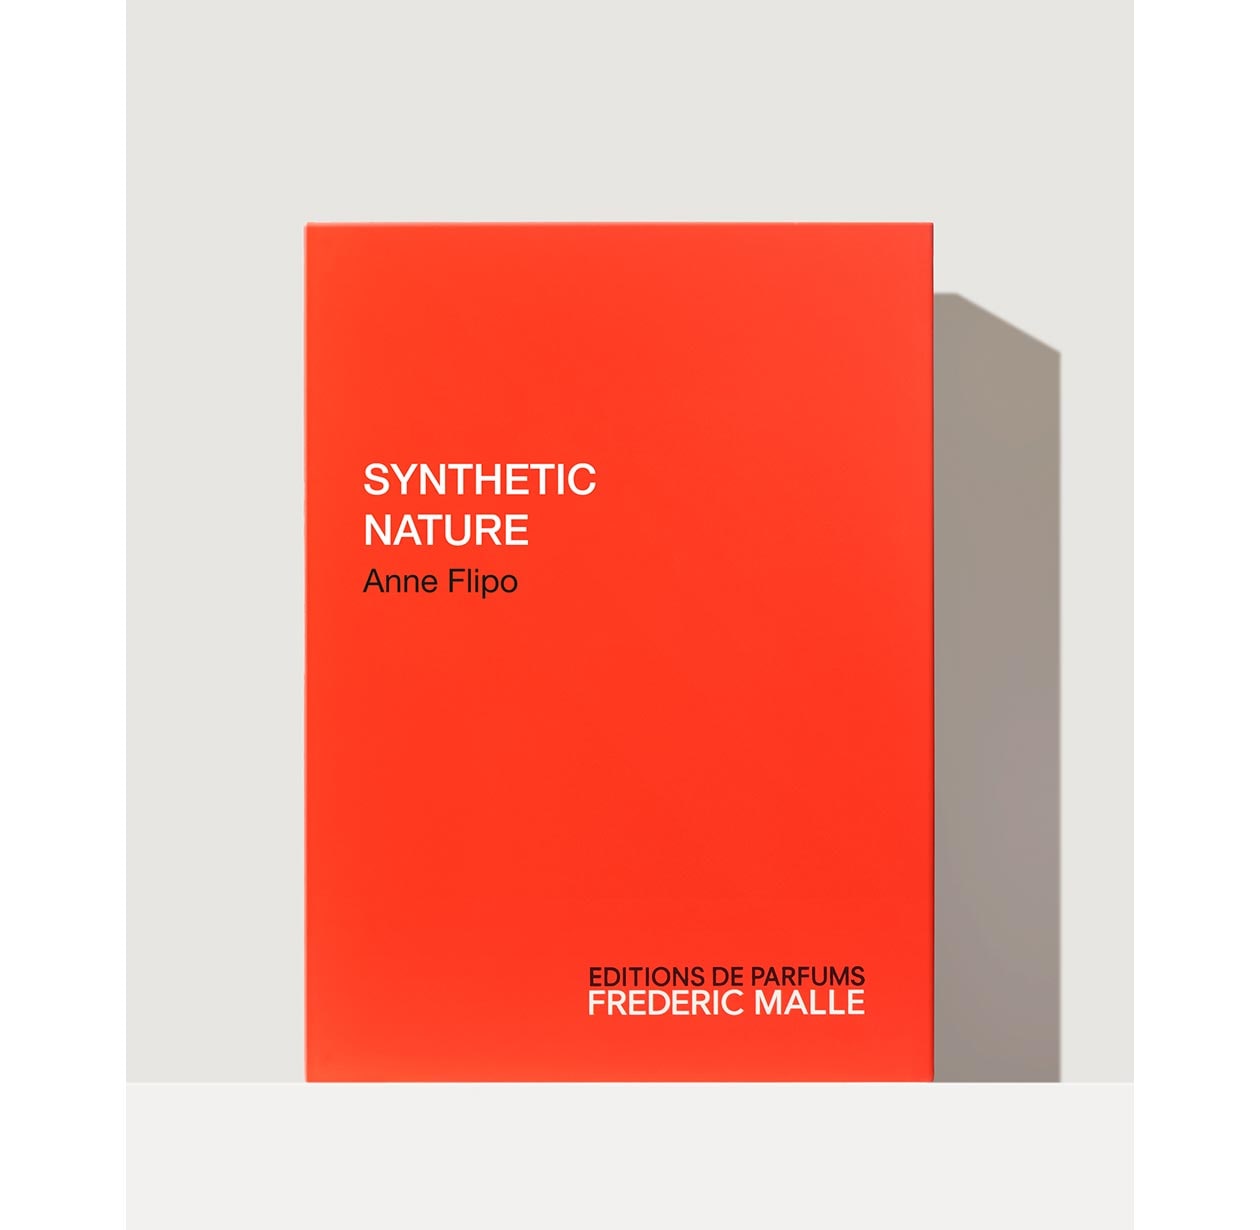 SYNTHETIC NATURE